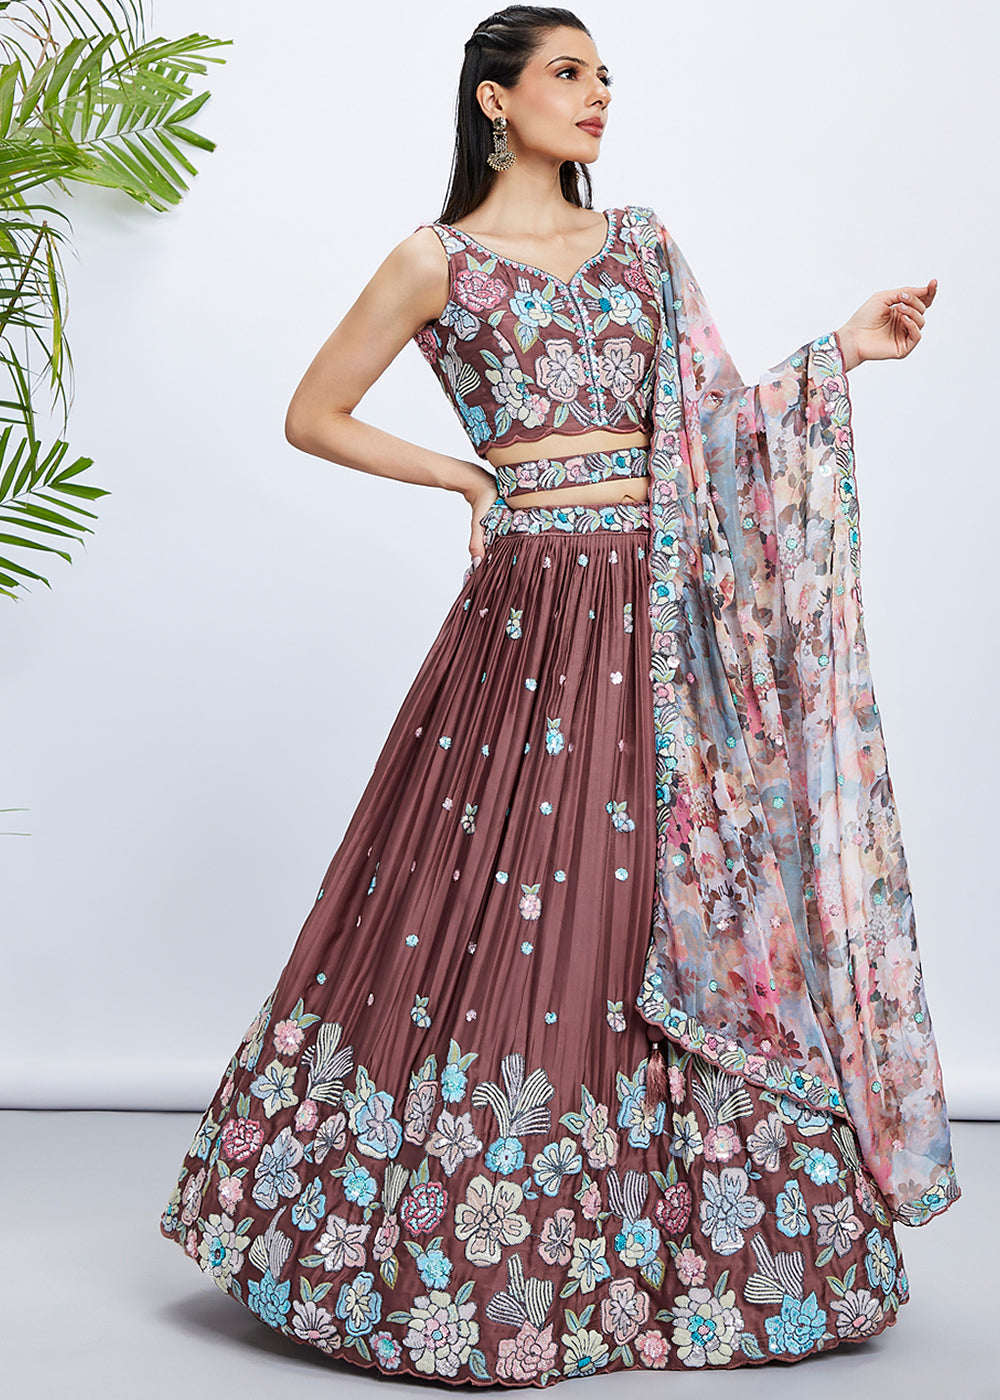 Dark Rose Gold Georgette Lehenga Choli with Sequins & Thread Embroidery work